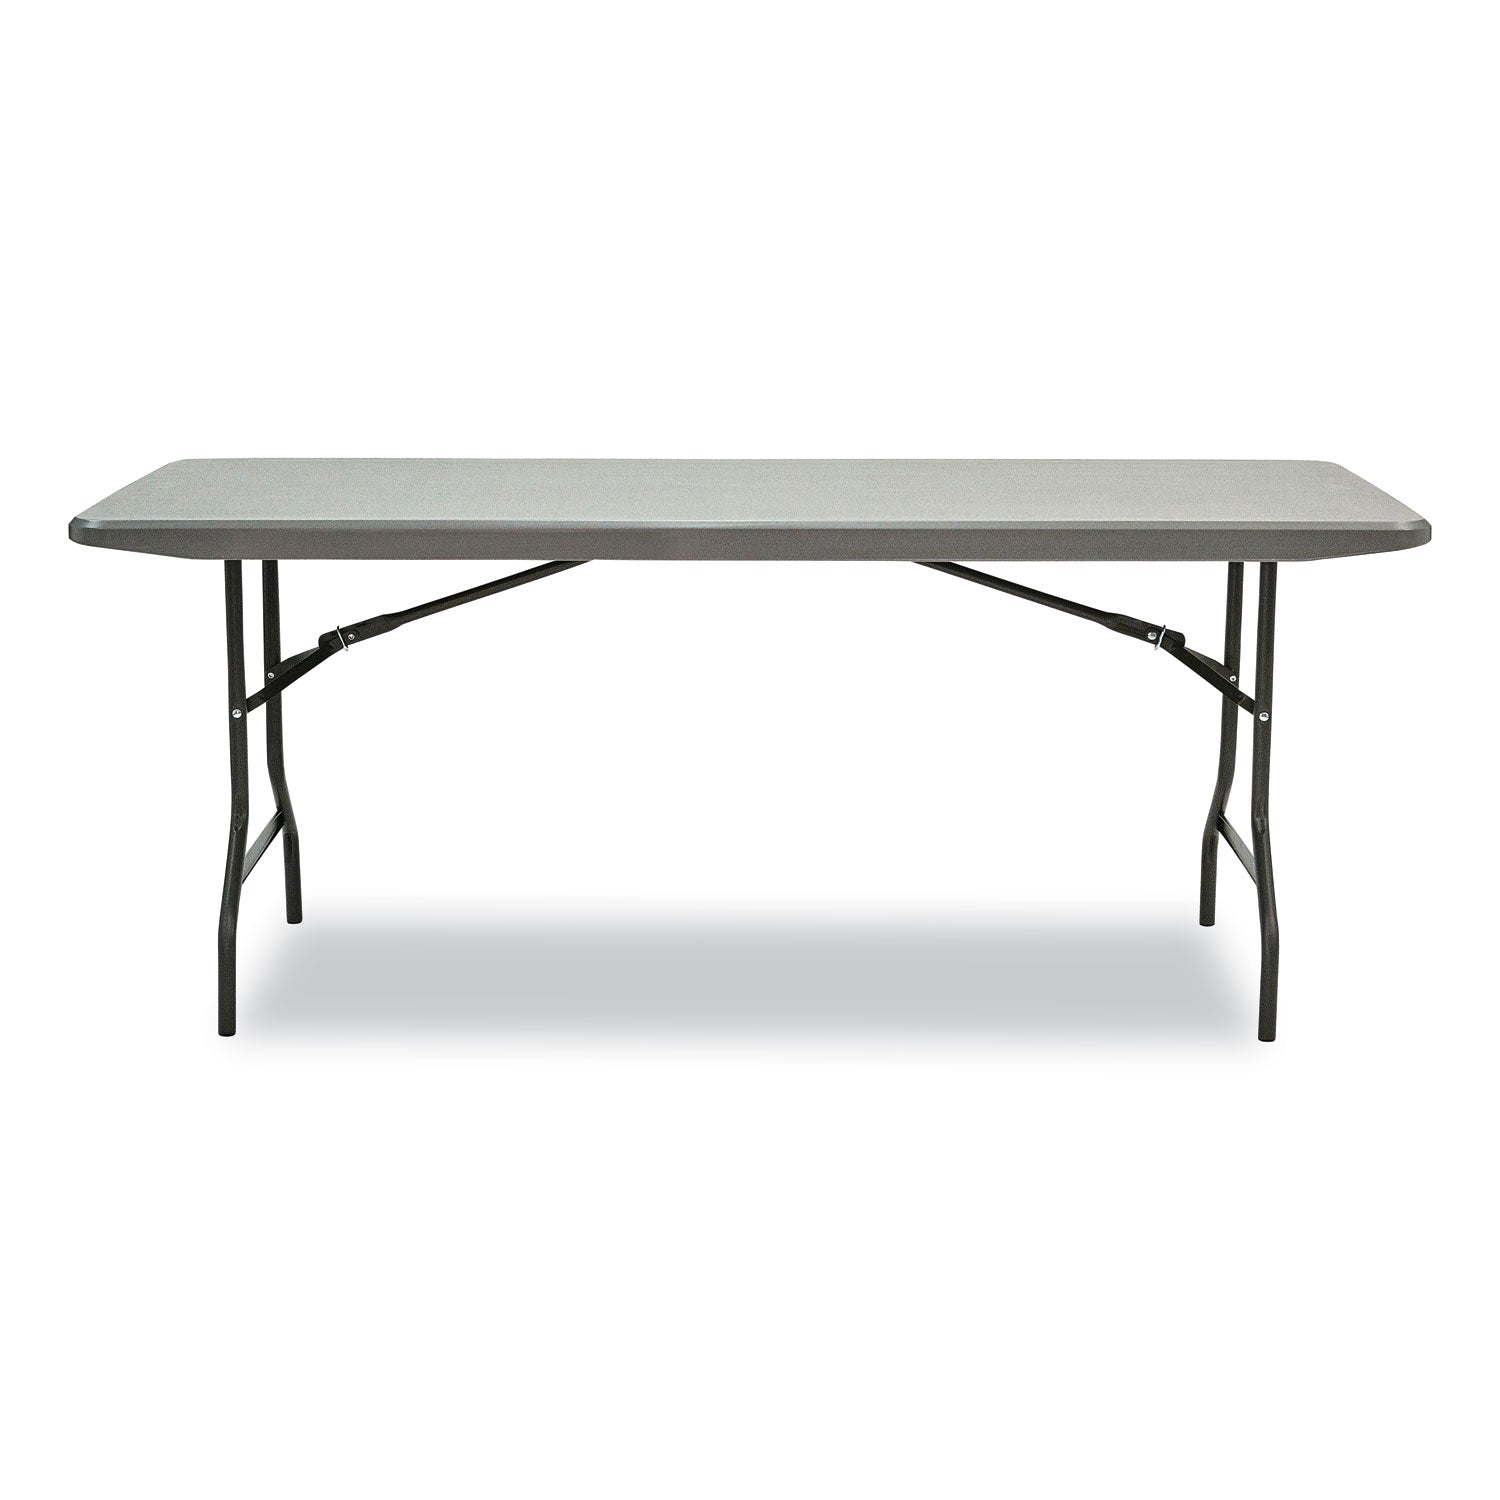 indestructable-commercial-folding-table-rectangular-72-x-30-x-29-charcoal-top-charcoal-base-legs_ice65527 - 4